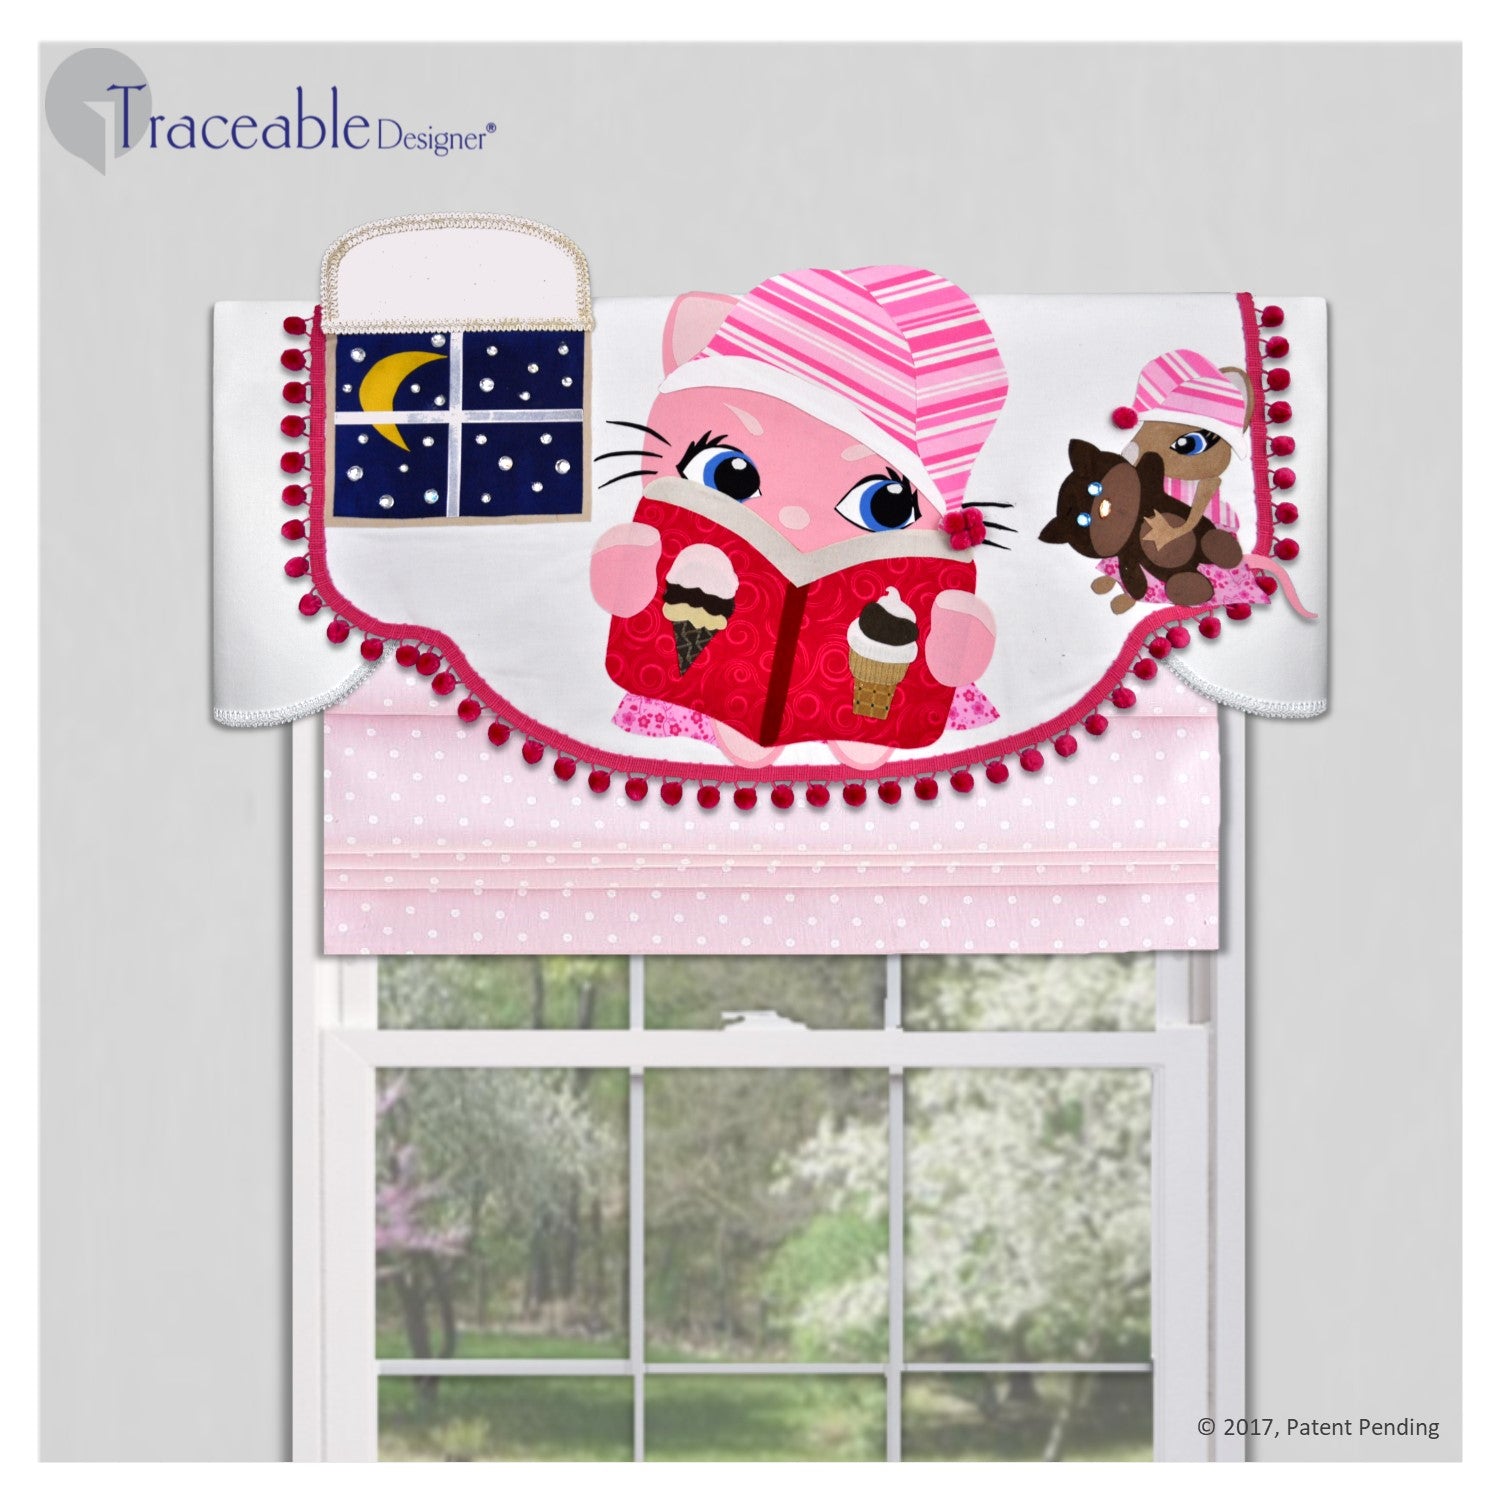 Traceable Designer girls room decorating kit, no-sew kitty valances and wall accents.  Designed by Linda Schurr